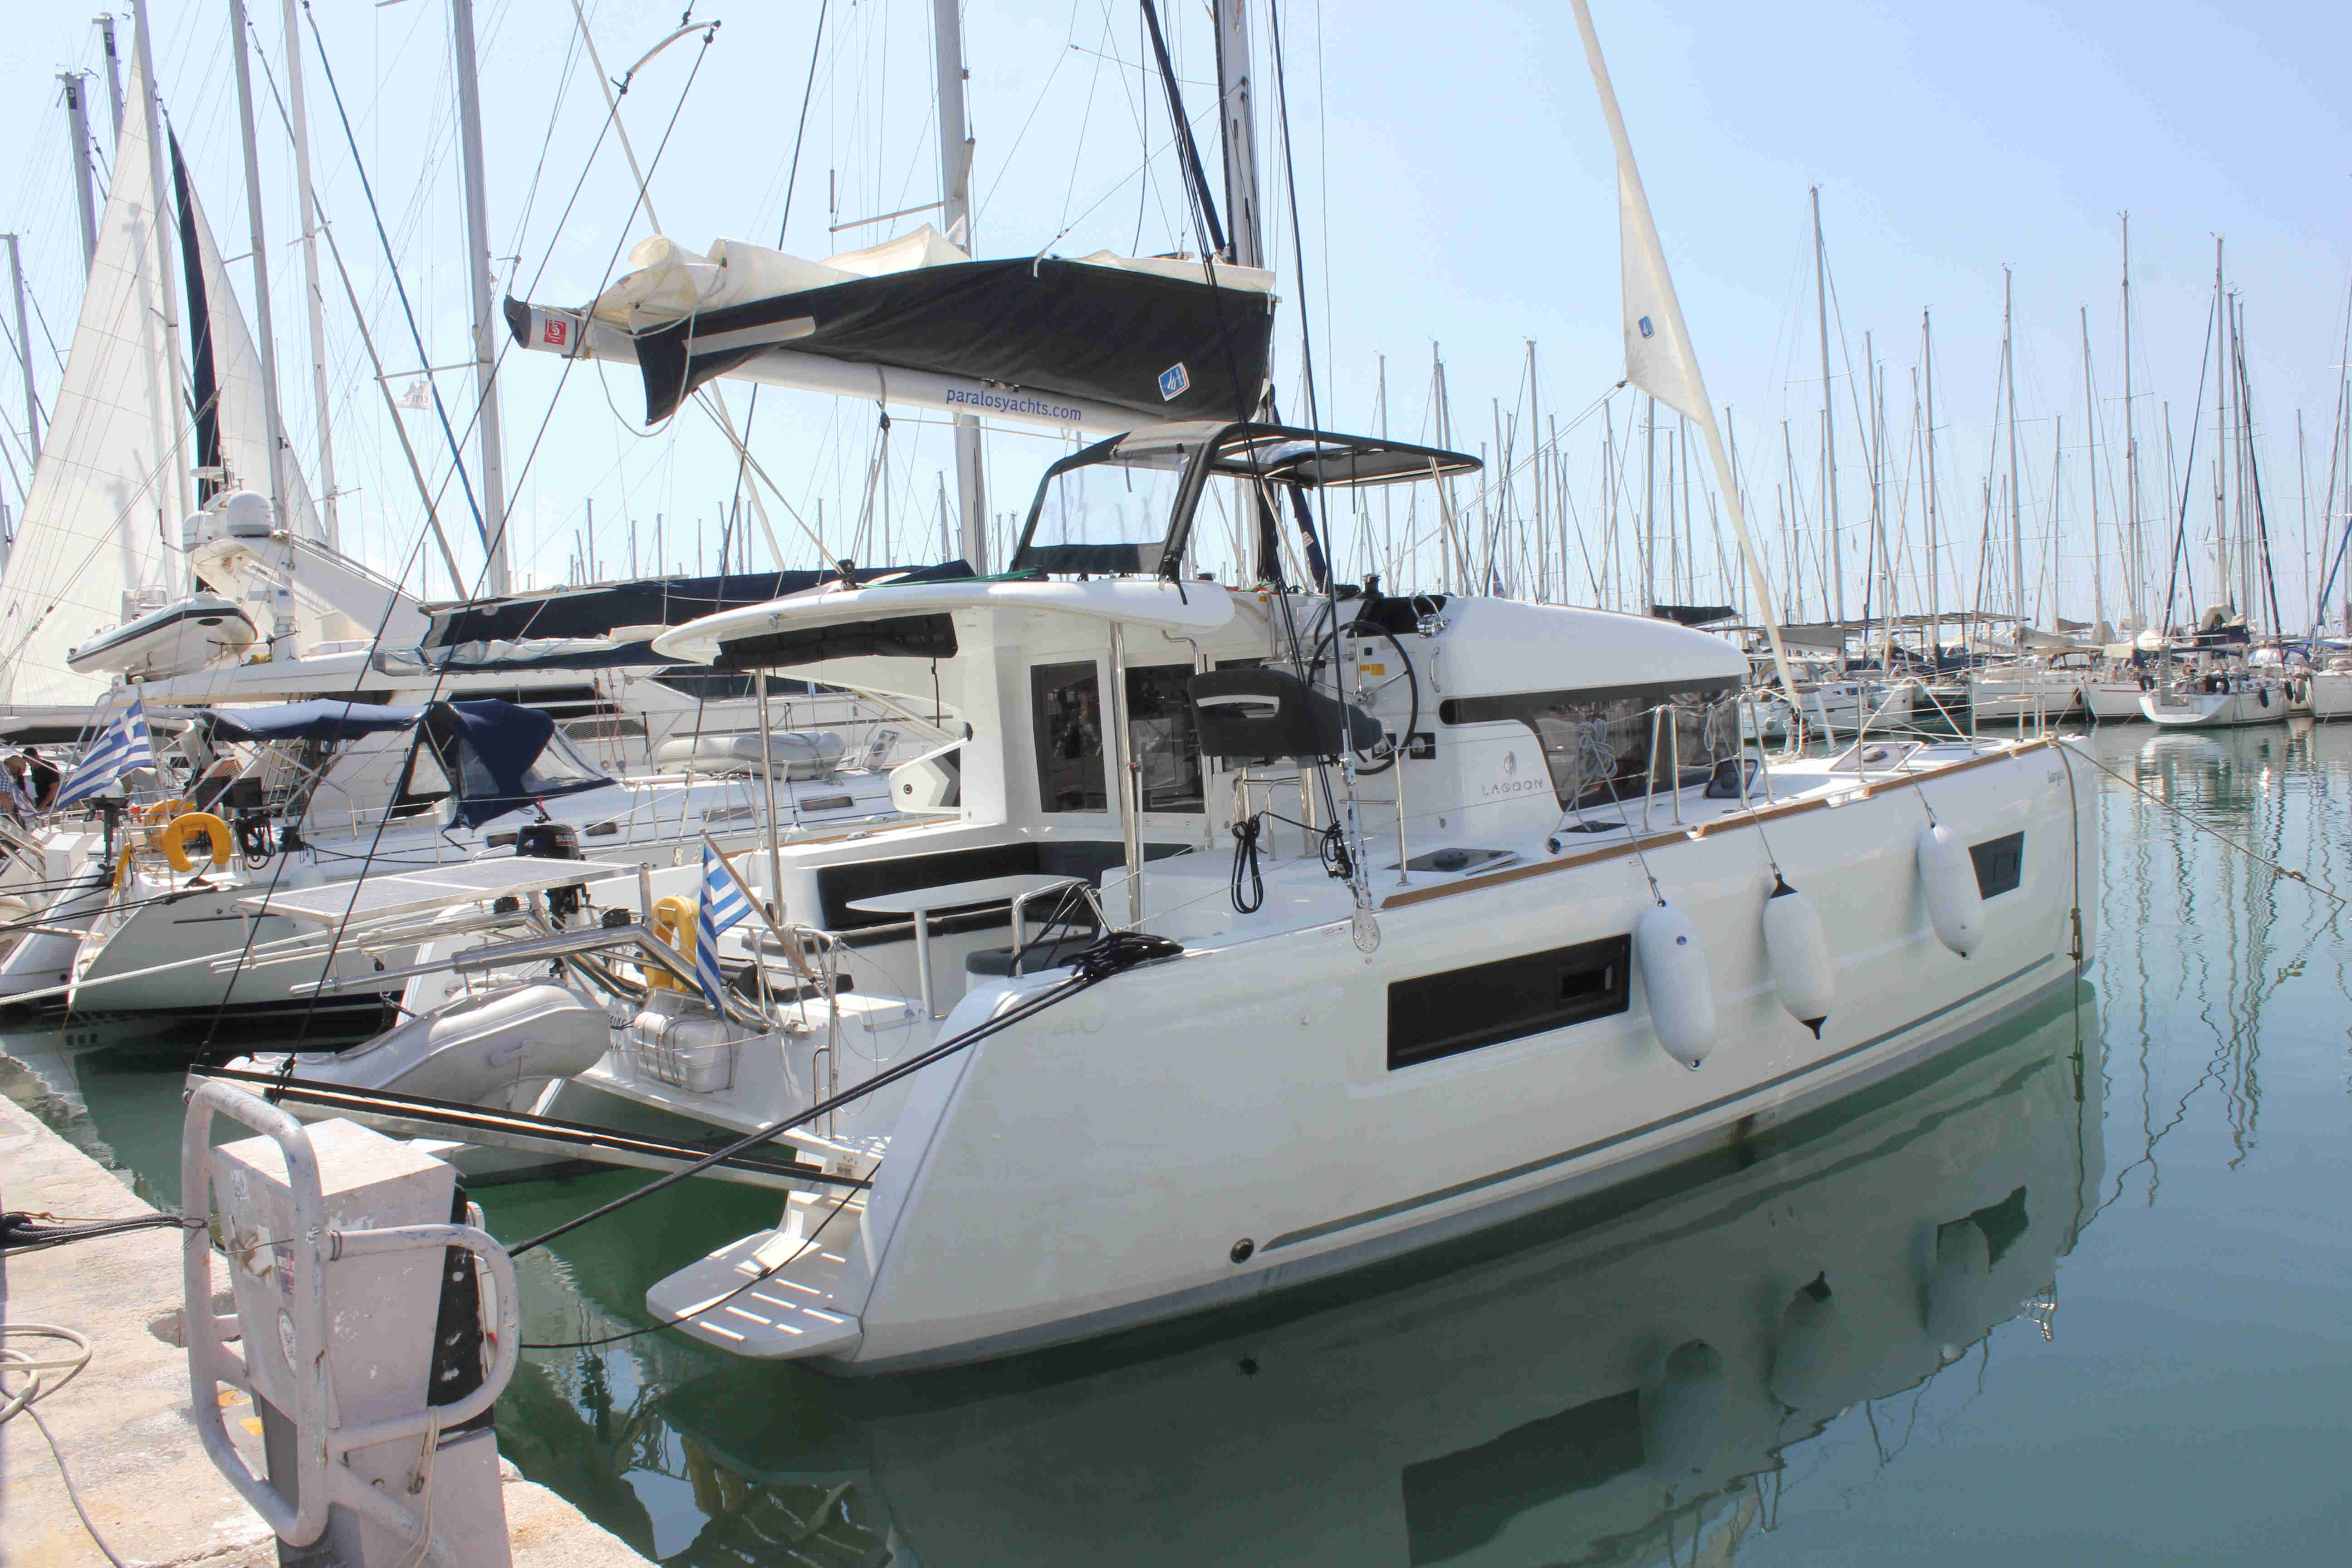 Lagoon 40 - Alimos Yacht Charter & Boat hire in Greece Athens and Saronic Gulf Athens Alimos Alimos Marina 4